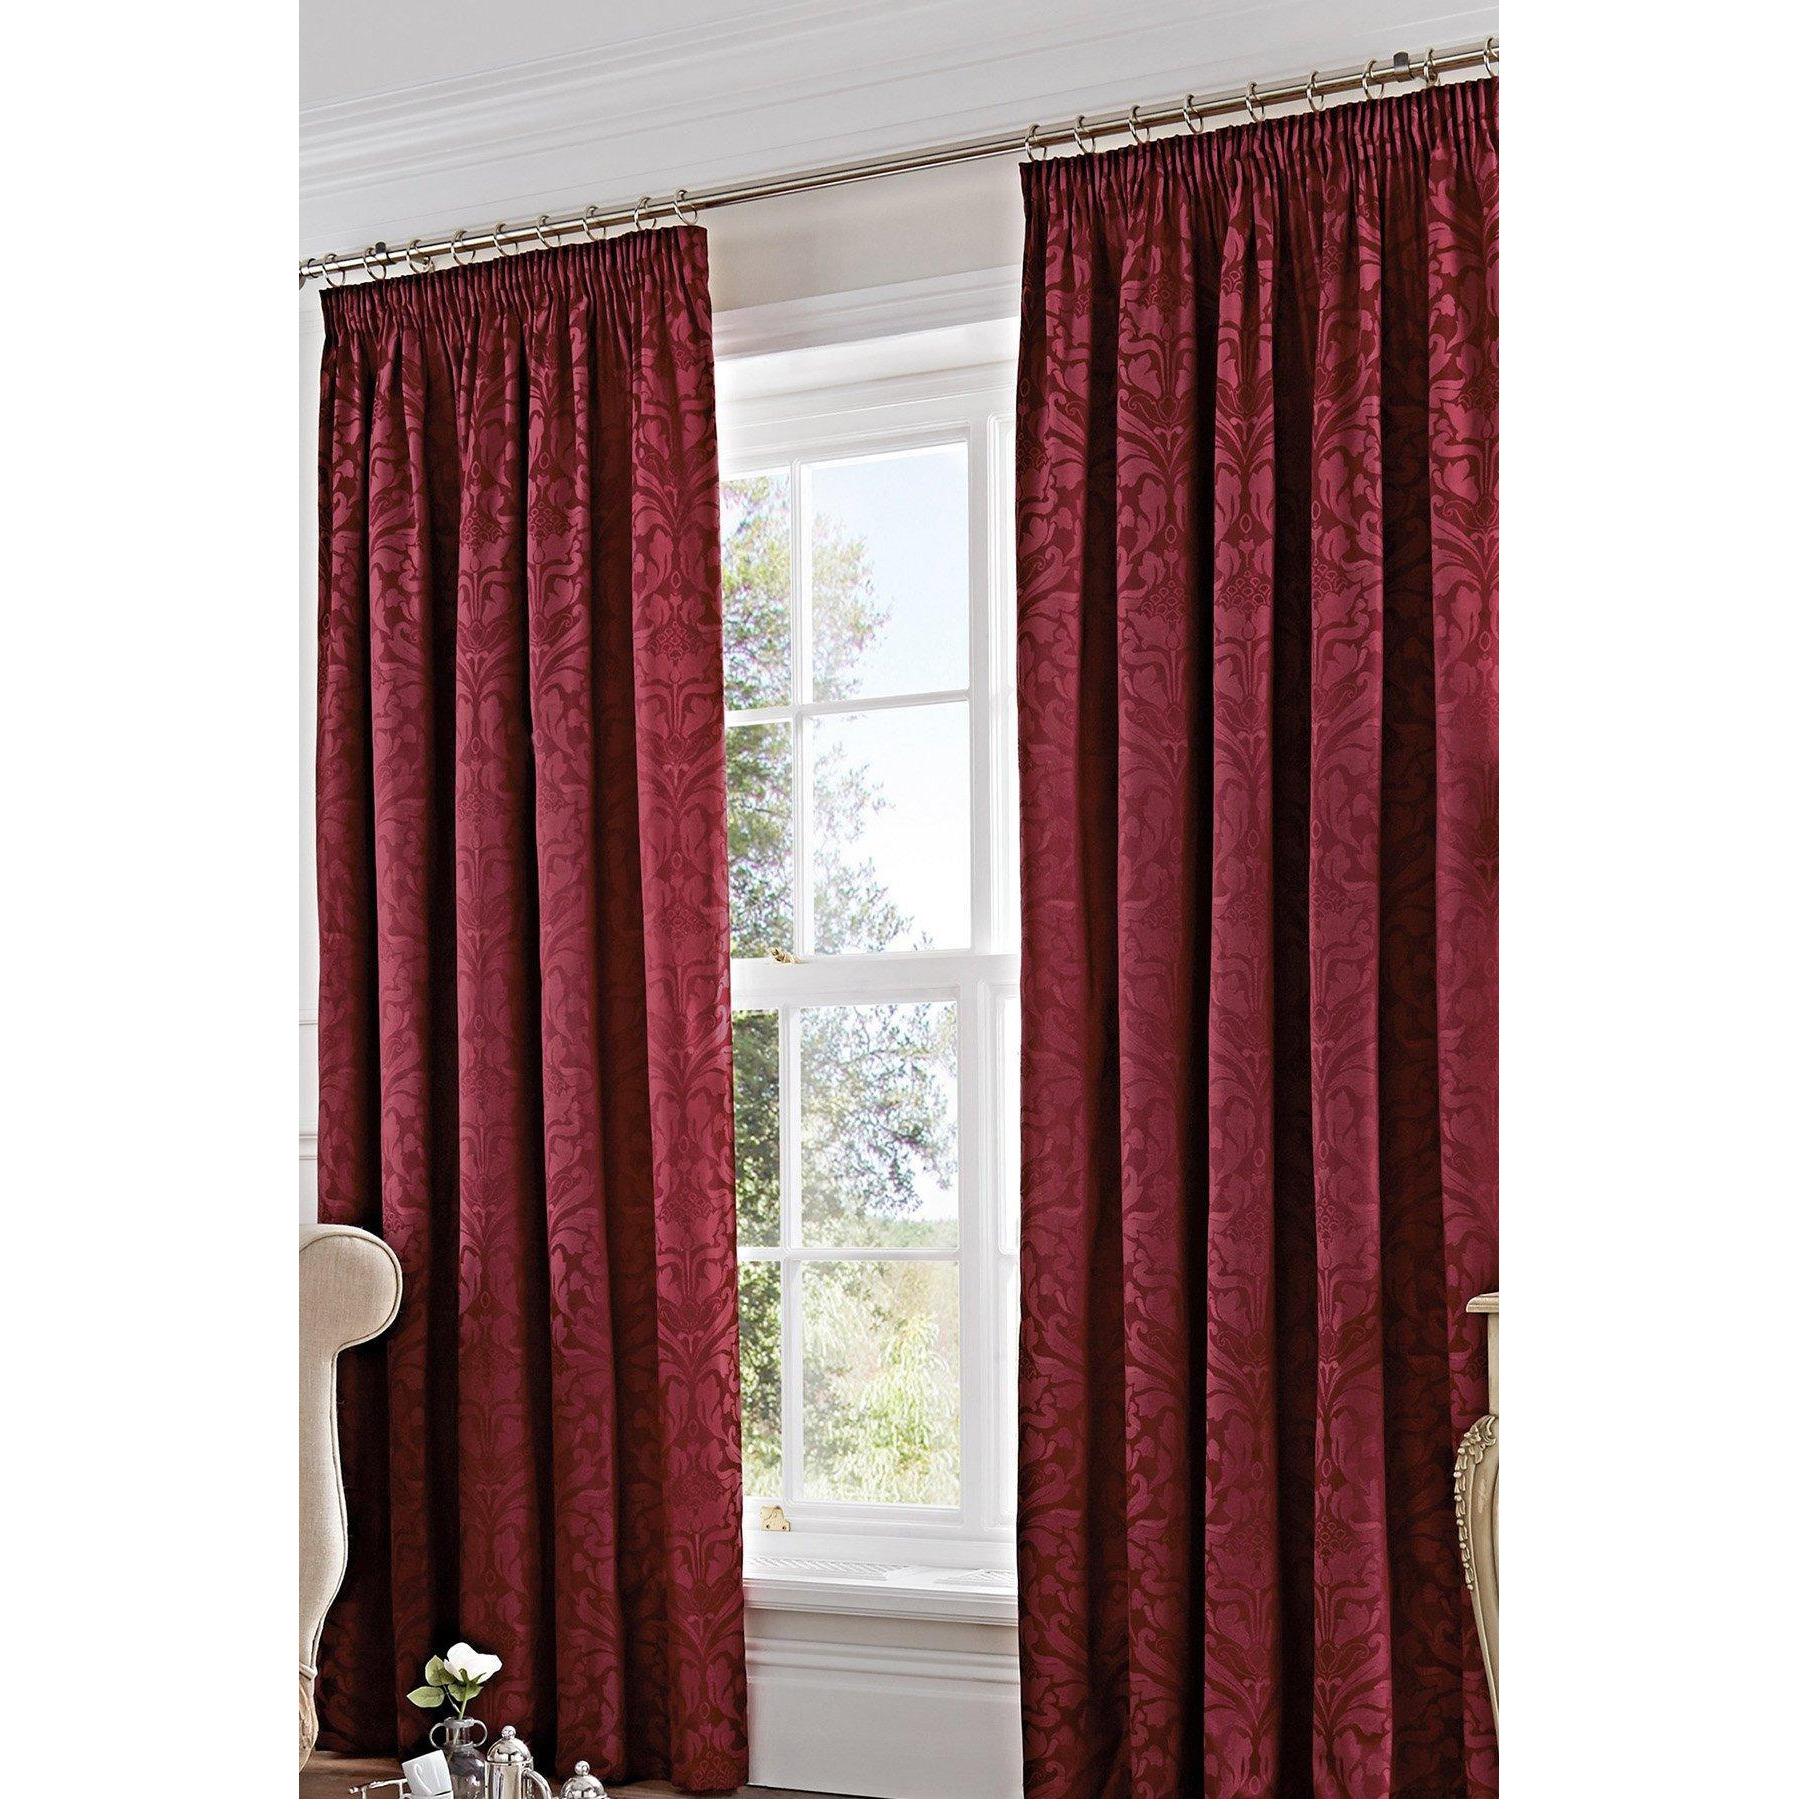 'Eastbourne' Damask Woven Jacquard Pair of Pencil Pleat Curtains - image 1